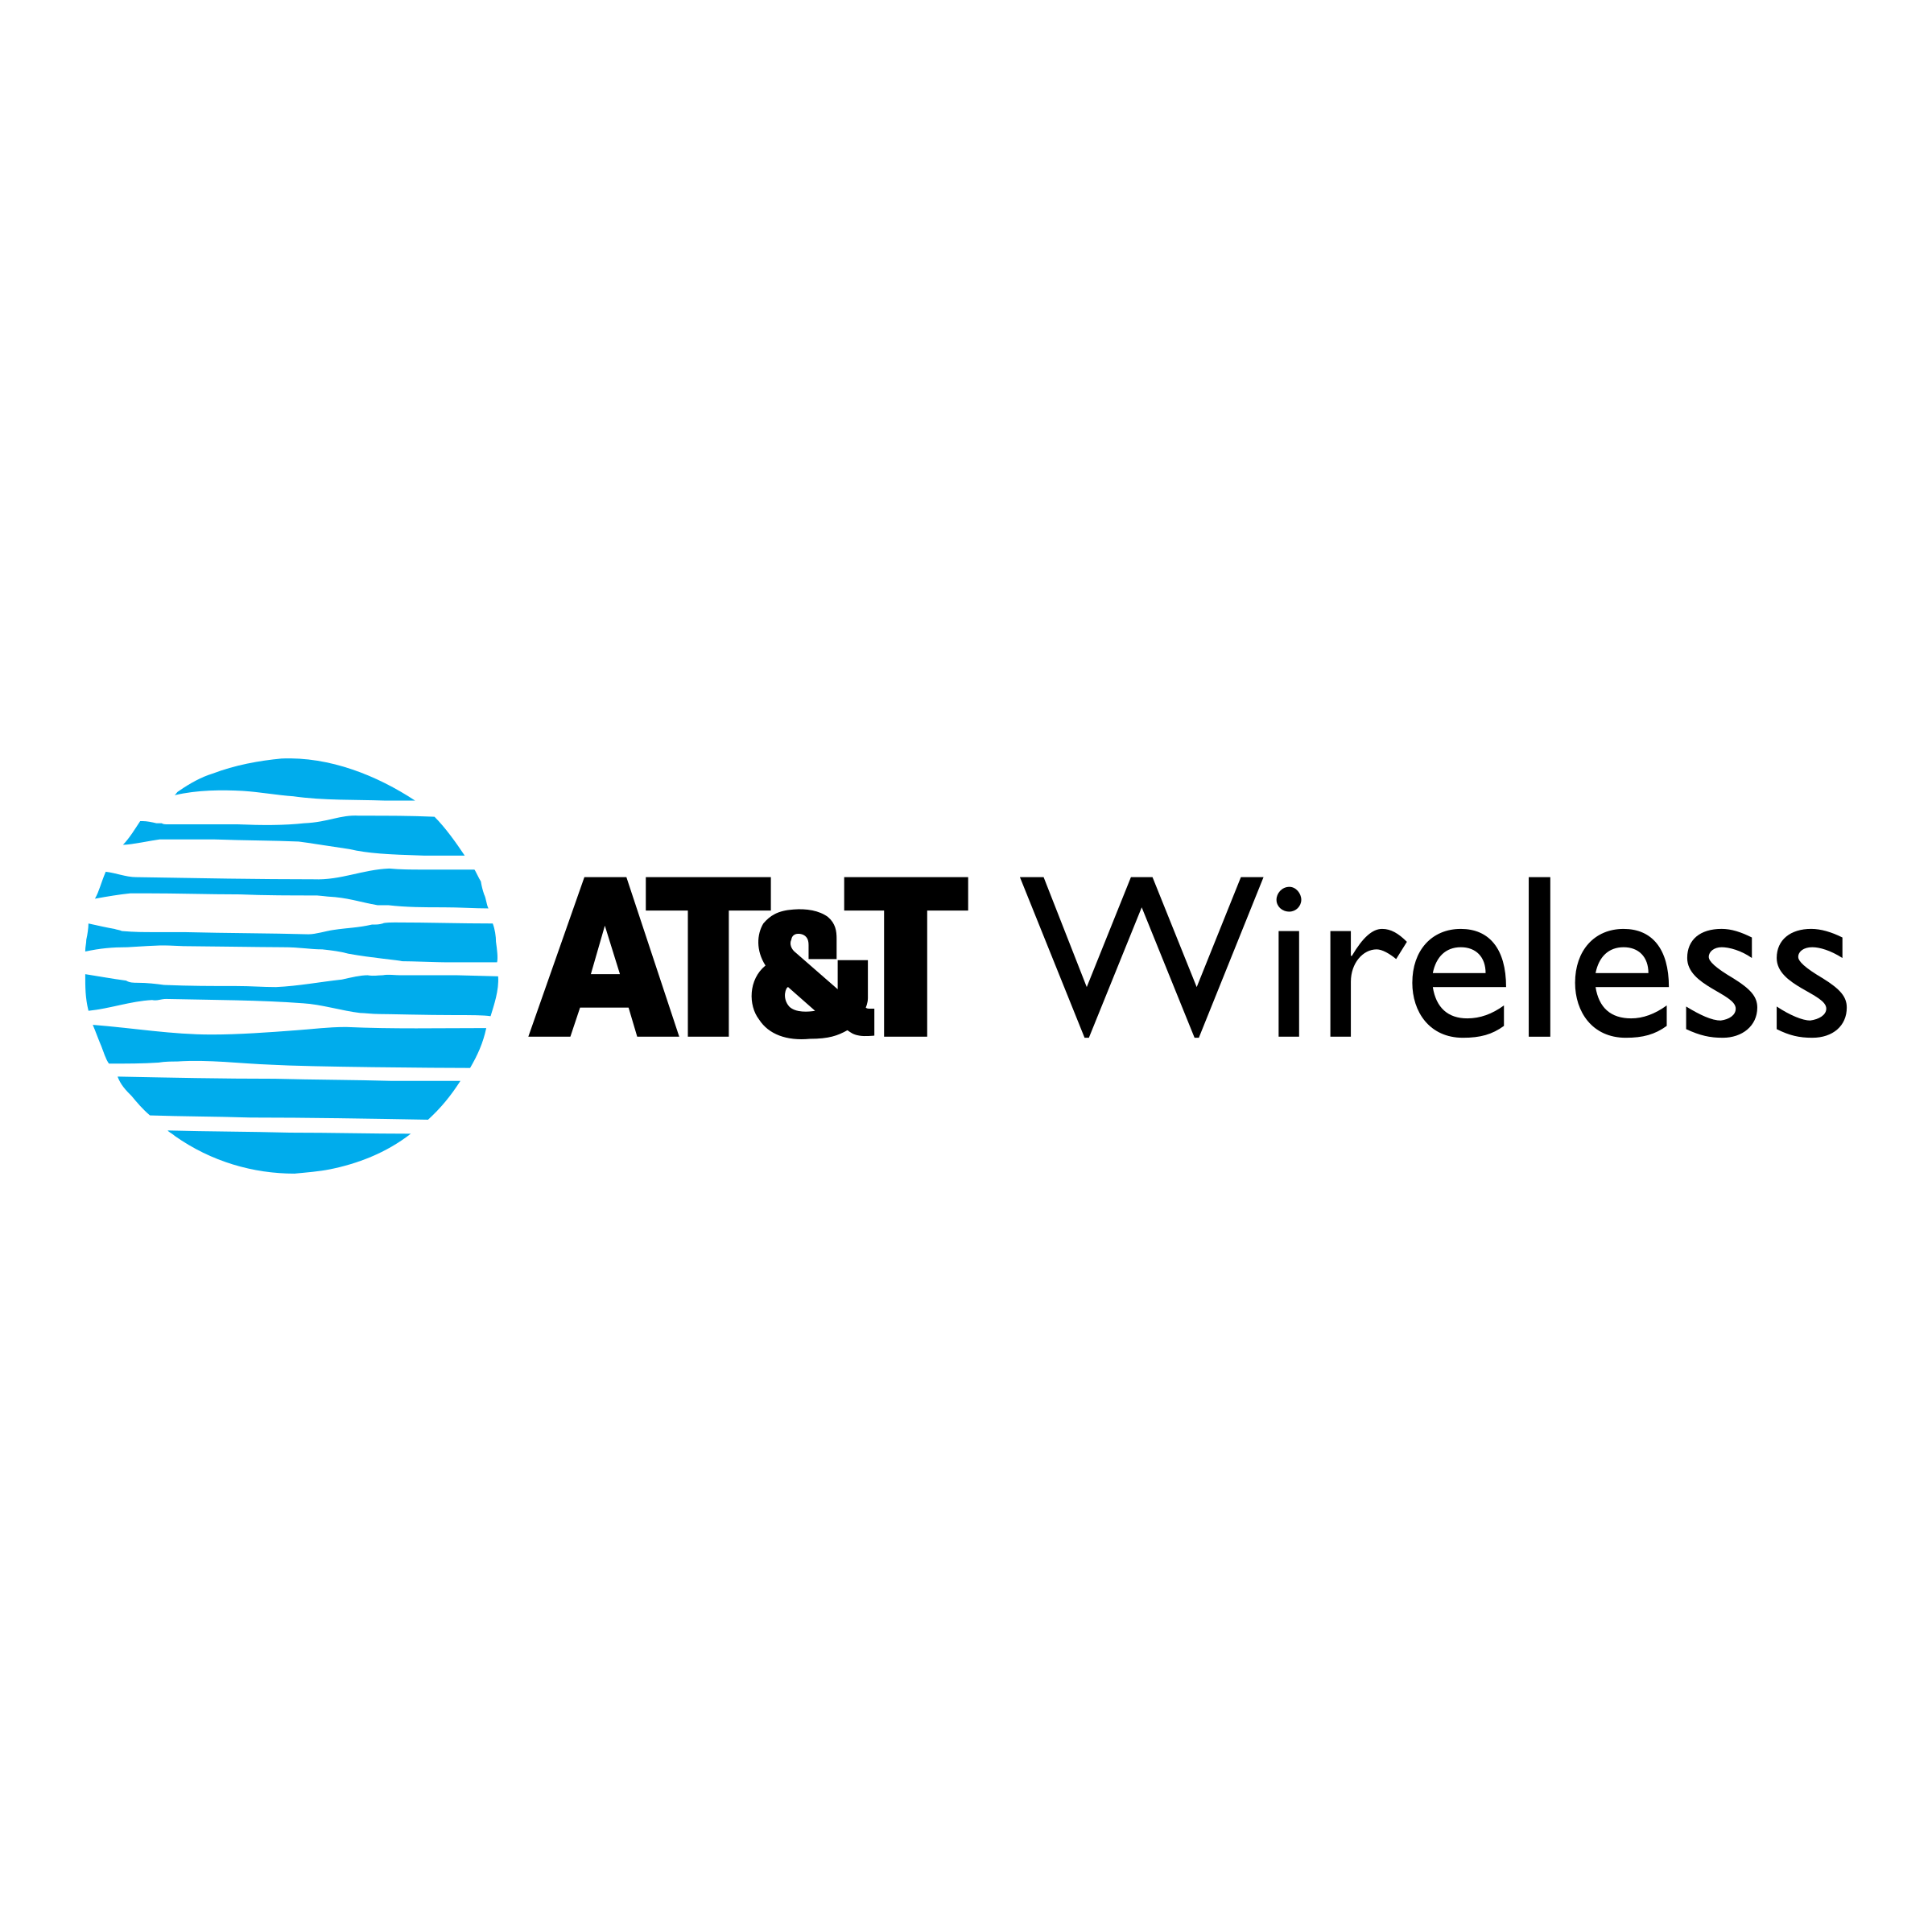 AT&T Mobility Logo - AT&T Wireless 02 Logo PNG Transparent & SVG Vector